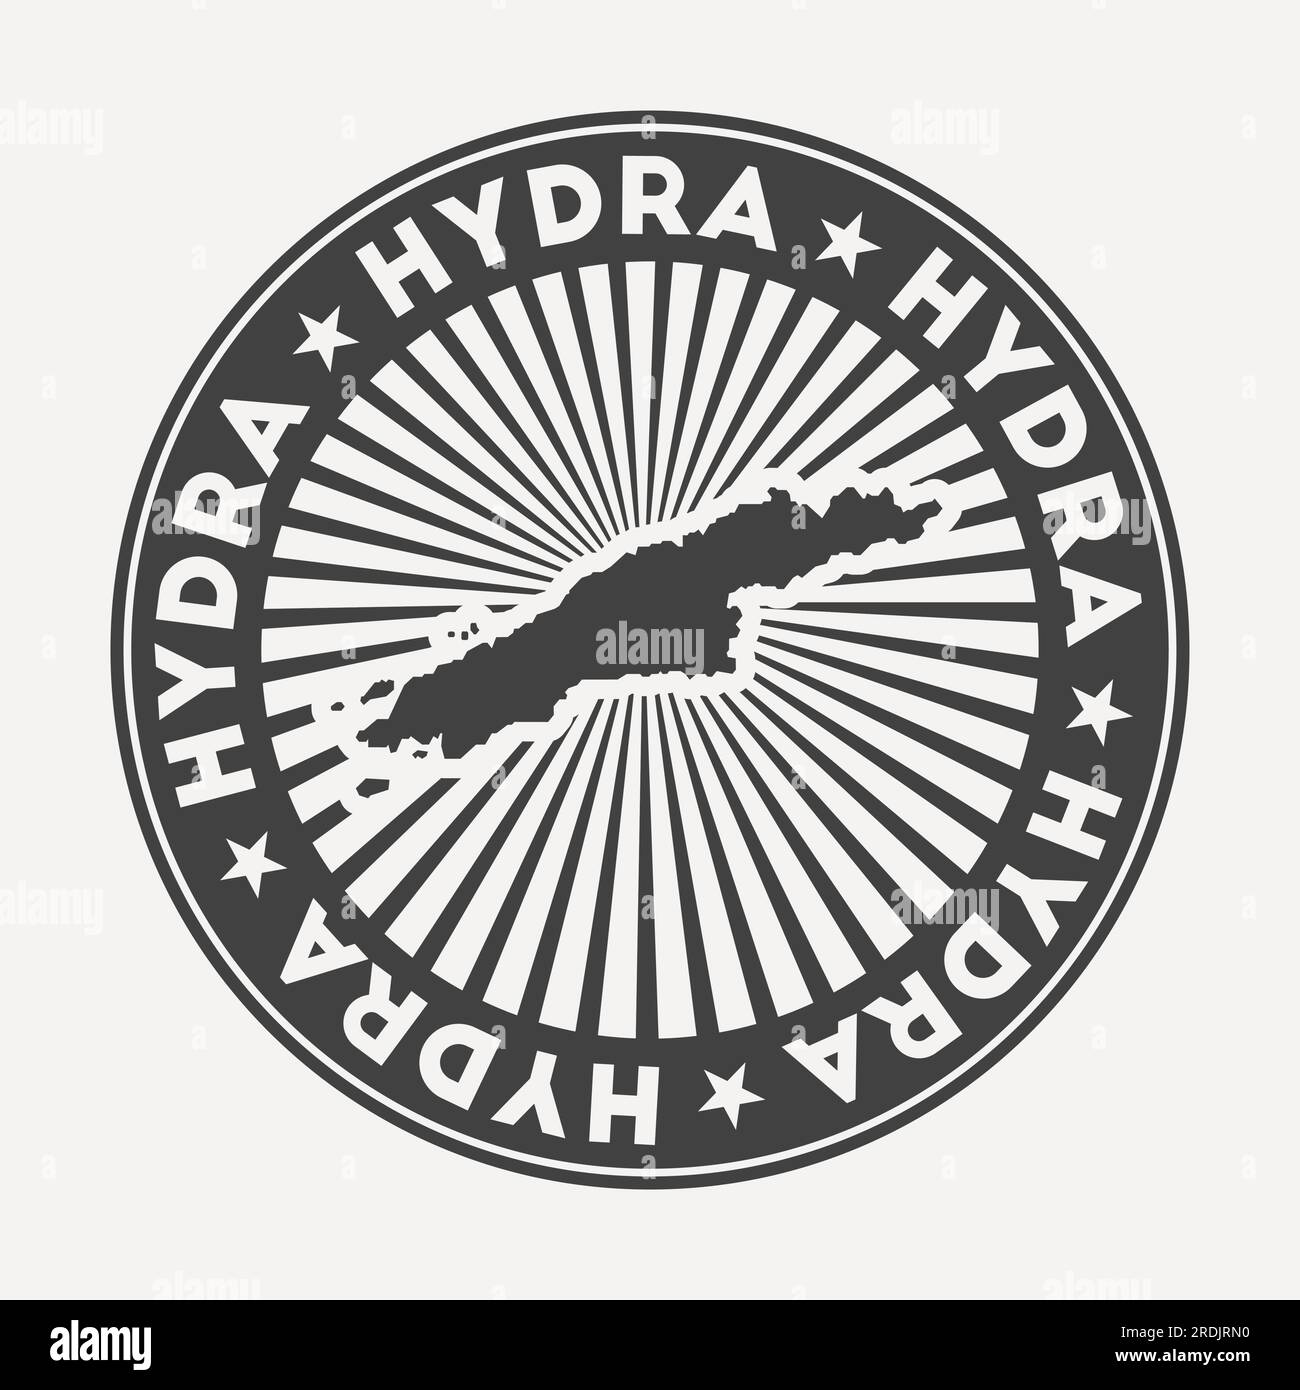 Hydra round logo. Vintage travel badge with the circular name and map of island, vector illustration. Can be used as insignia, logotype, label, sticke Stock Vector